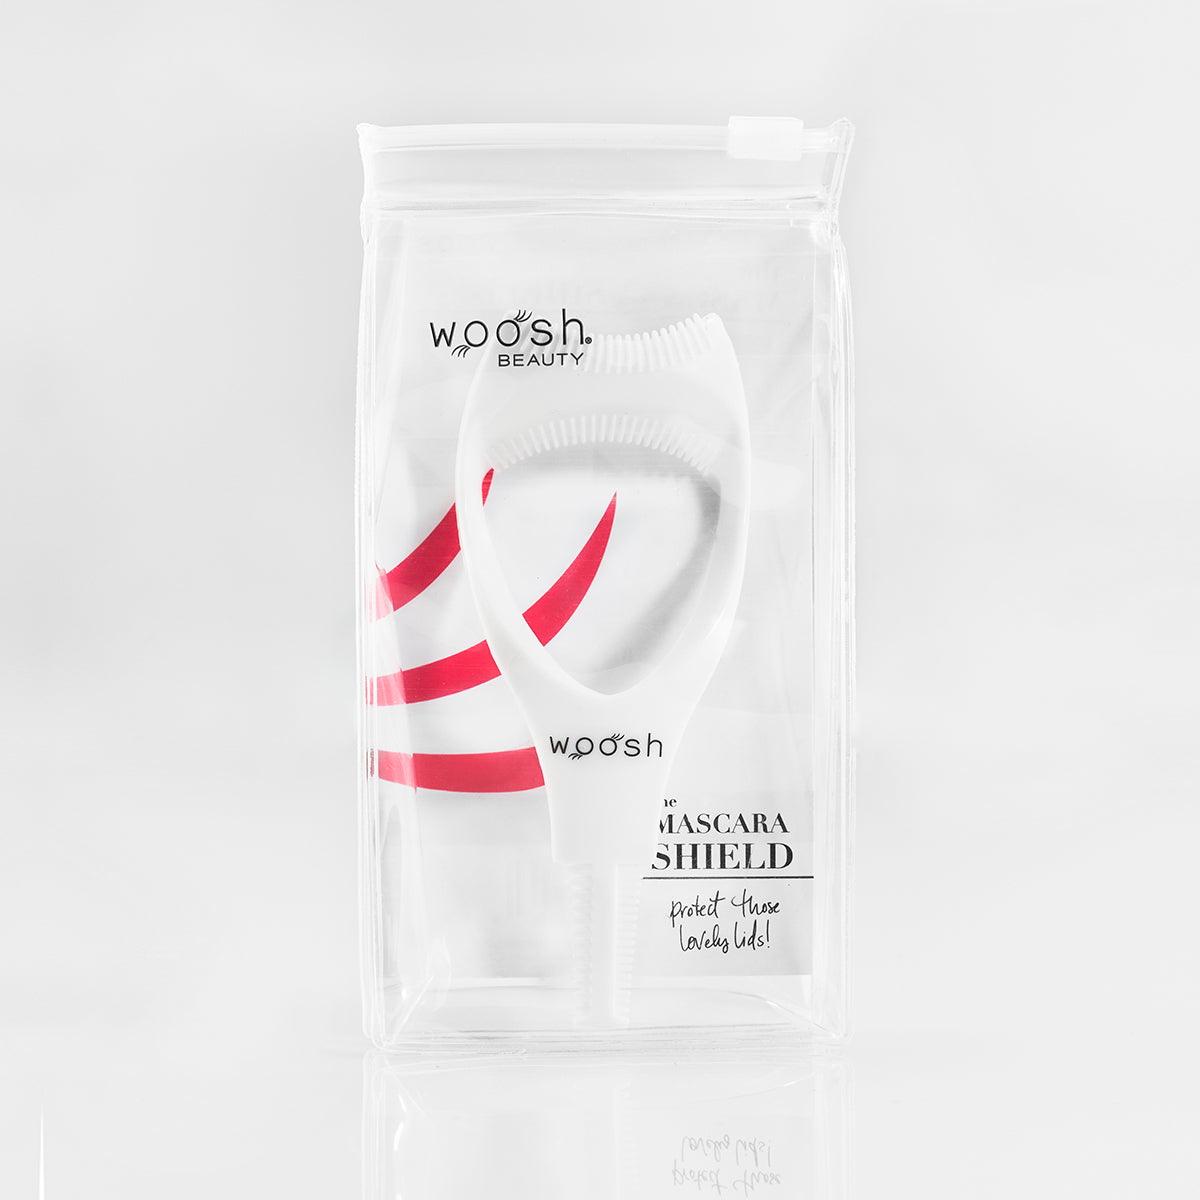 The white, flexible, plastic mascara shield in reusable package.